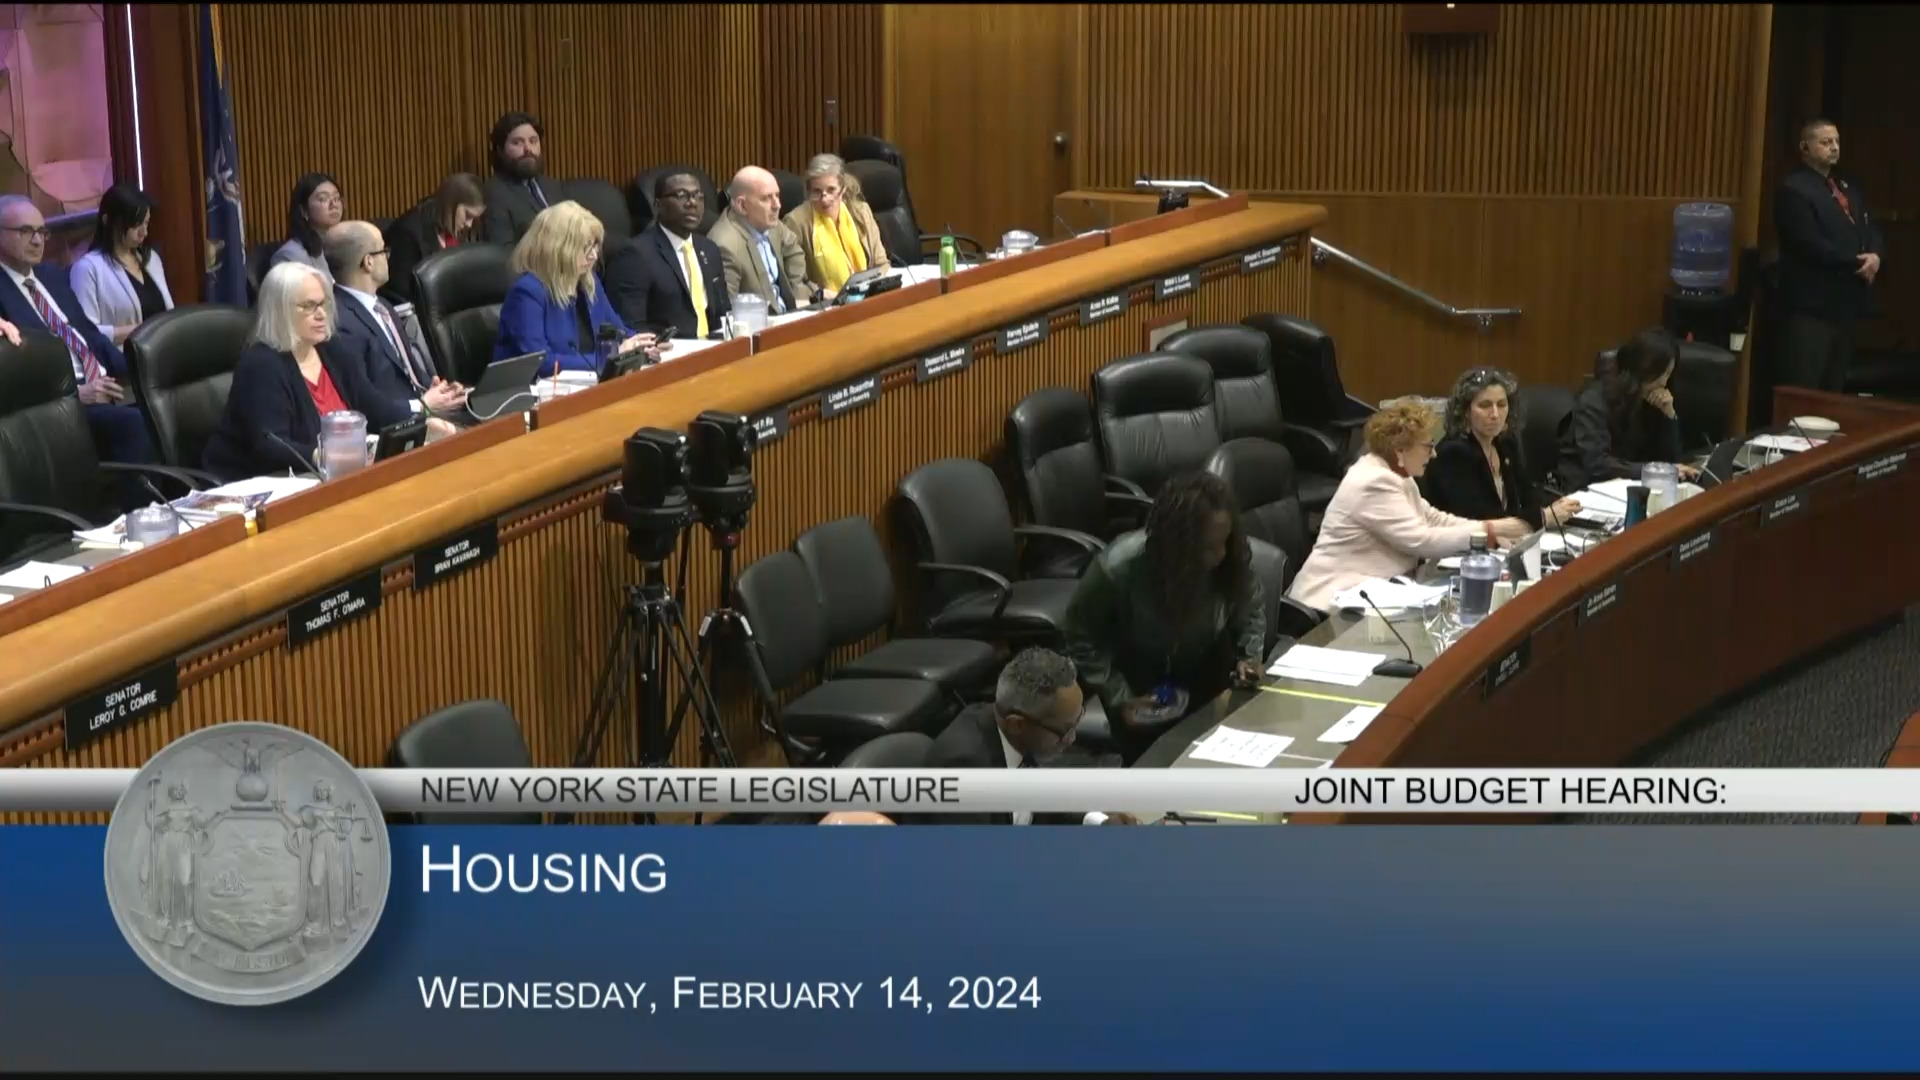 NYS Homes & Community Renewal Commissioner Testifies During Budget Hearing on Housing